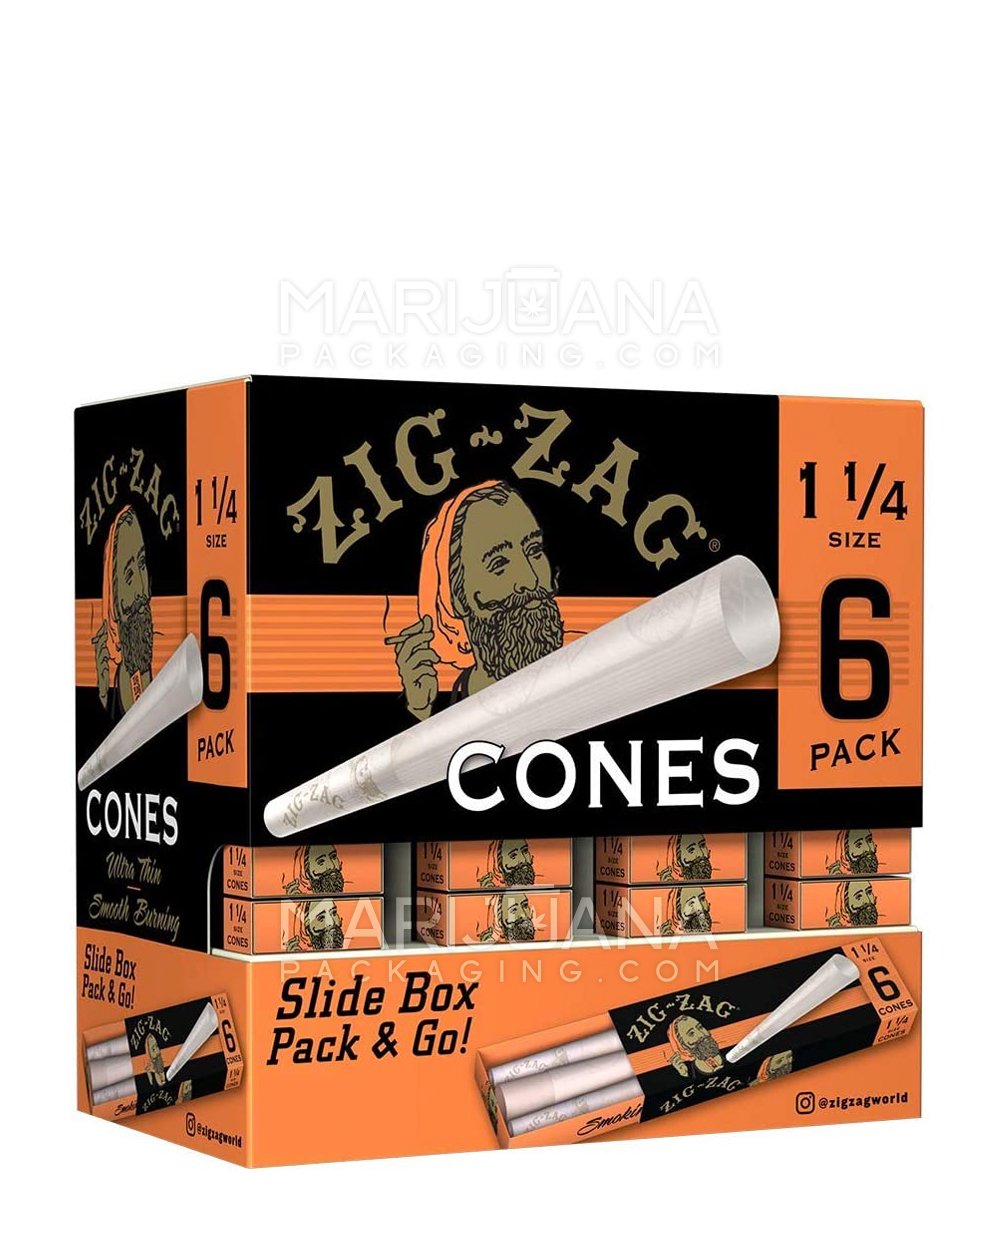 ZIG ZAG | 'Retail Display' 1 1/4 Pre-Rolled Cones Promo Pack | 84mm - White Paper - 36 Count - 1